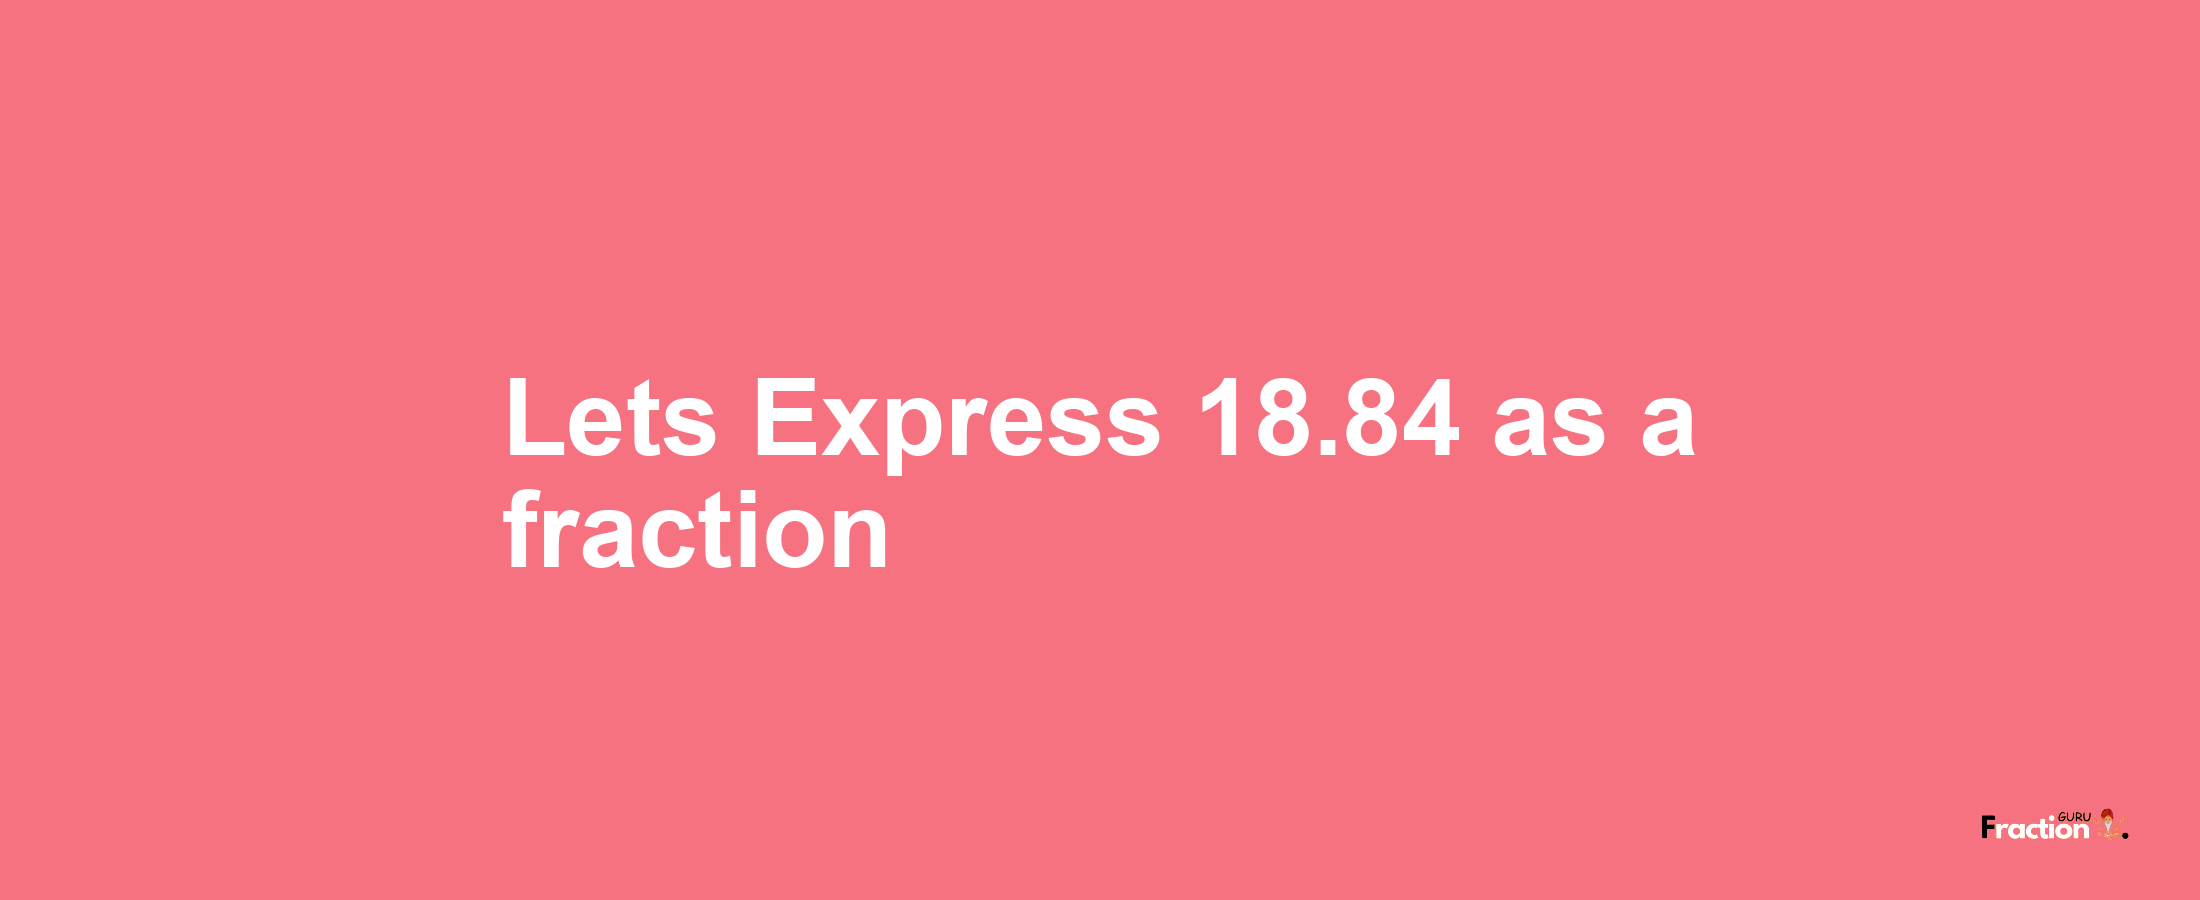 Lets Express 18.84 as afraction